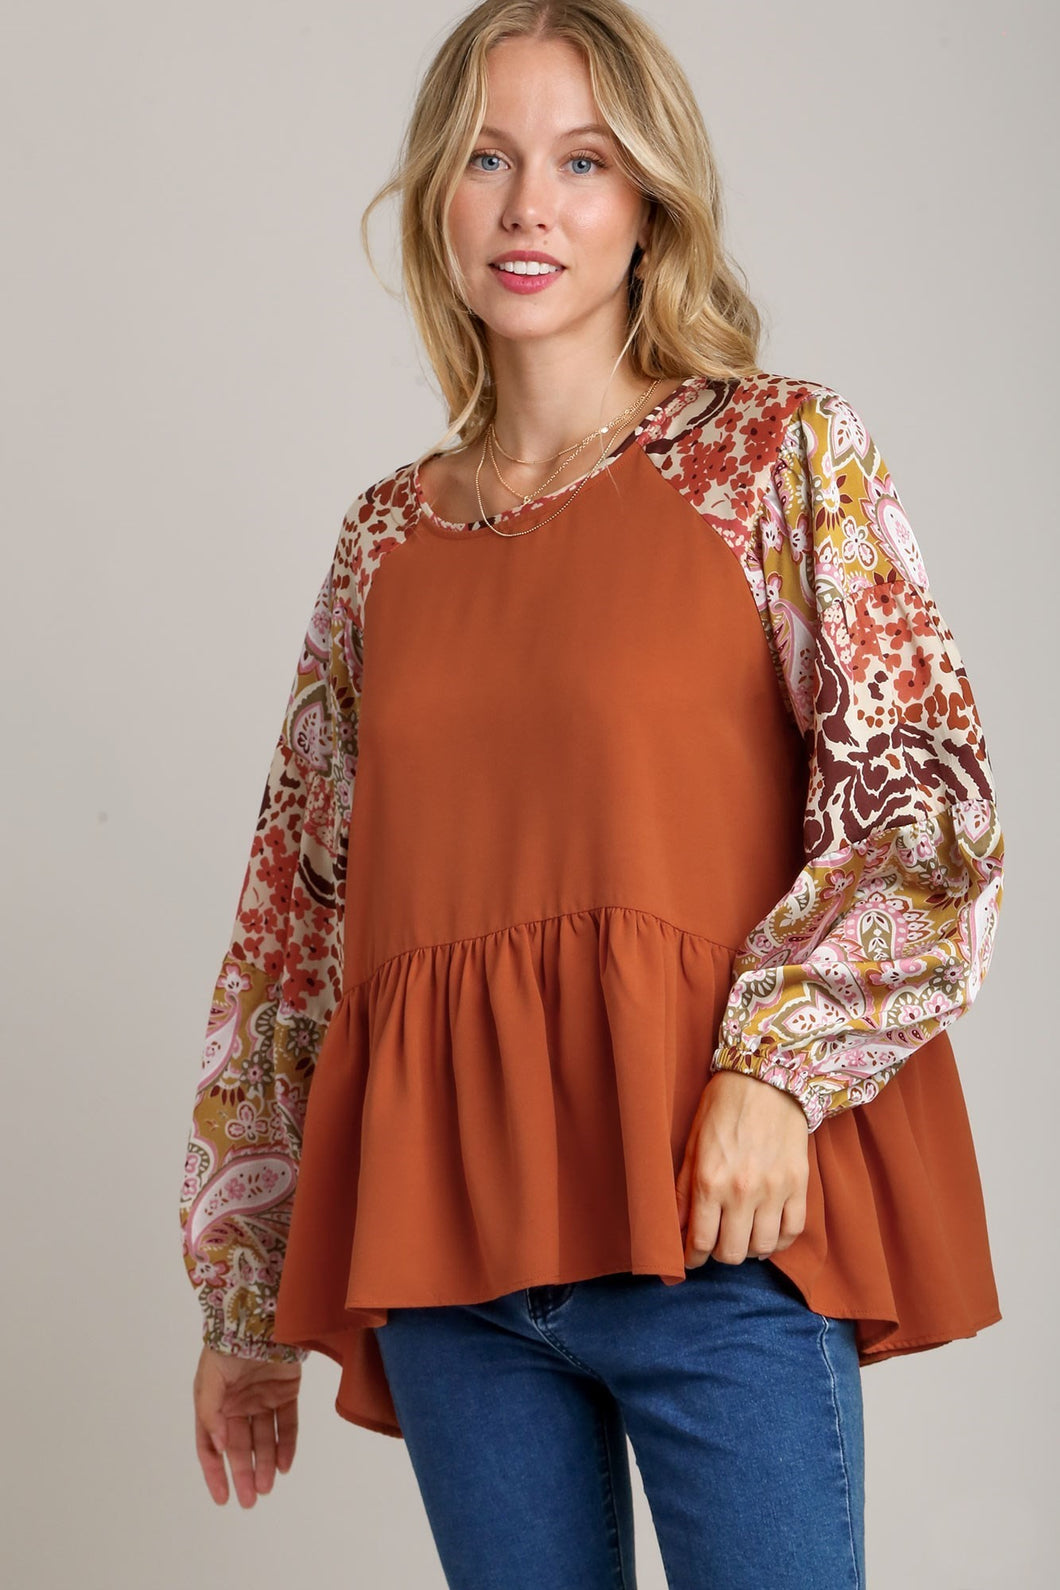 Umgee Solid Color Babydoll Top with Mixed Print Sleeves in Rust Shirts & Tops Umgee   